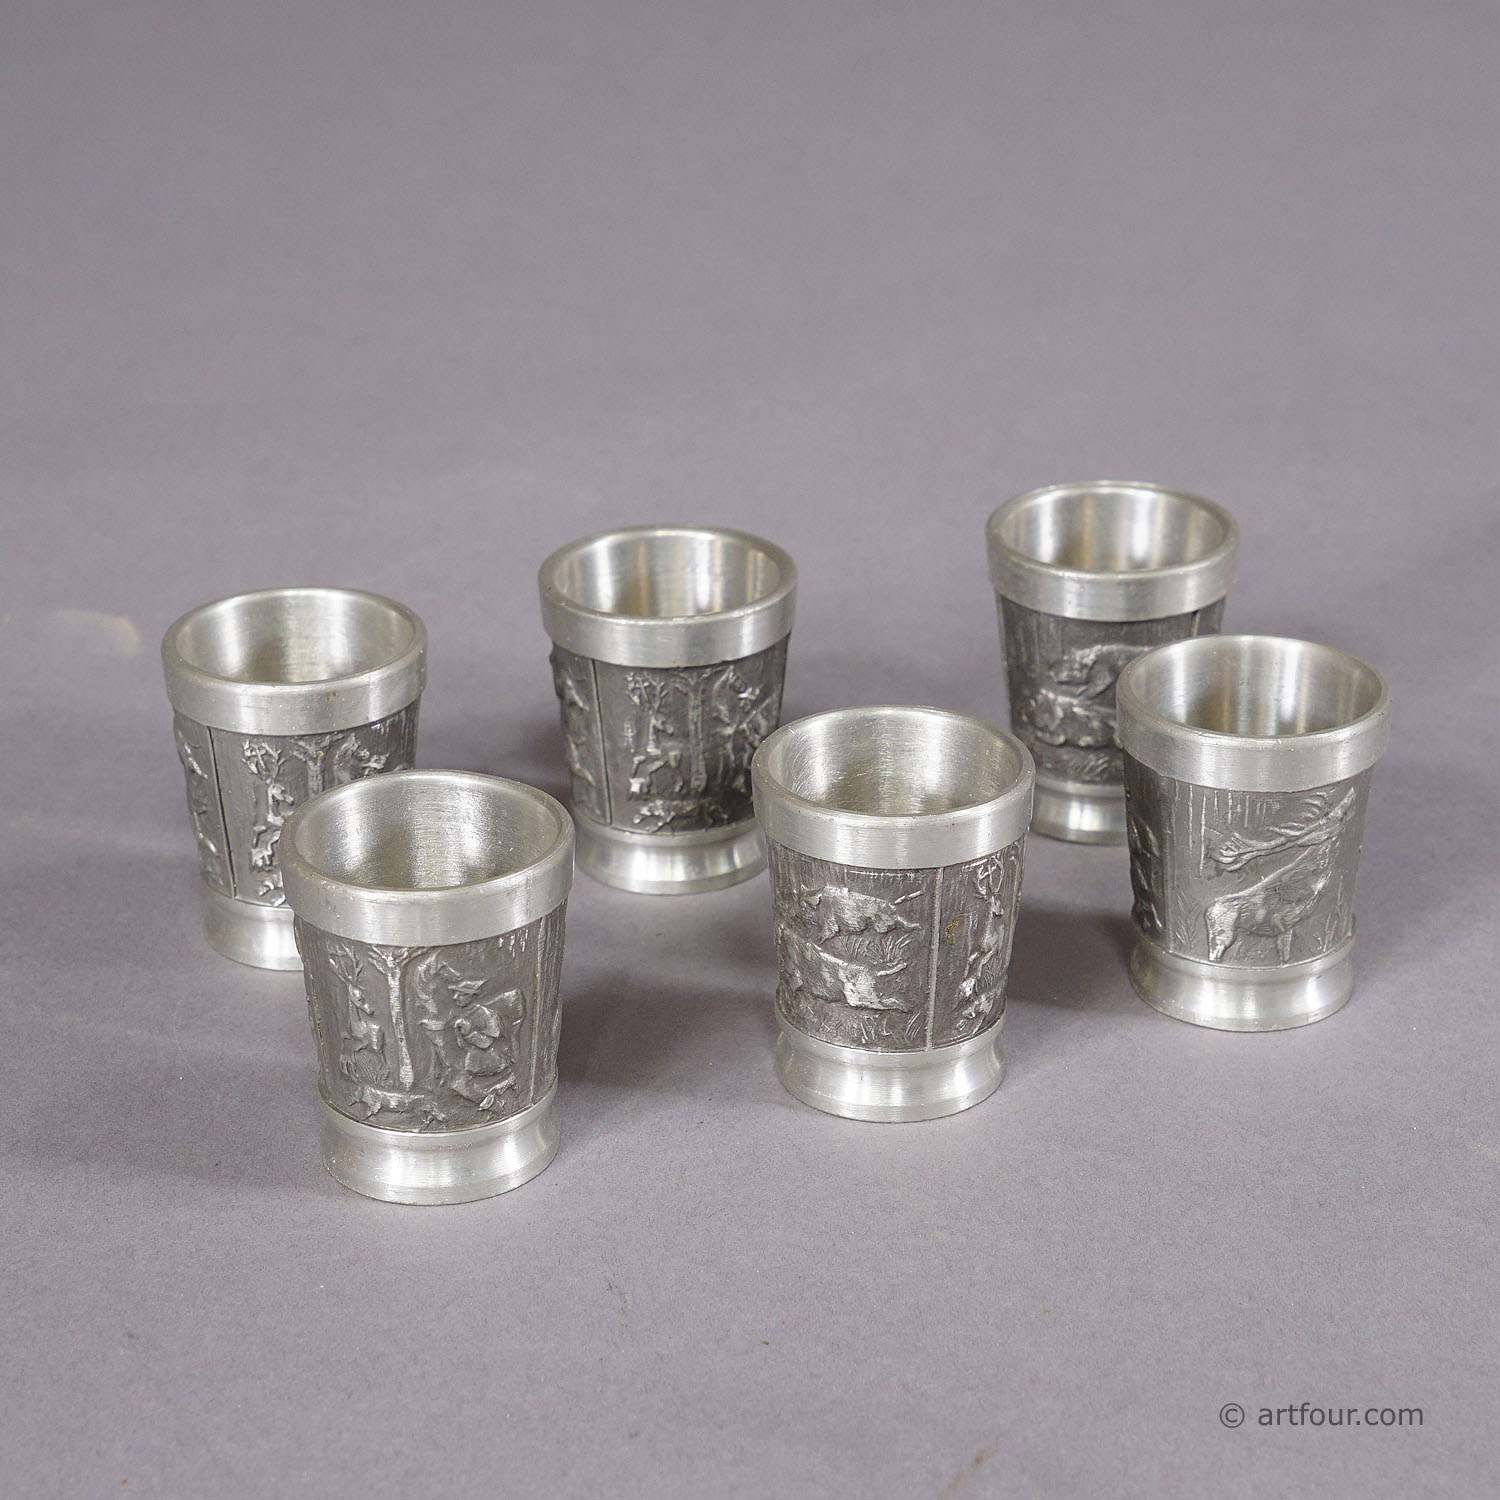 A Black Forest Rustic Drinking Set with Six Pewter Shot Glasses